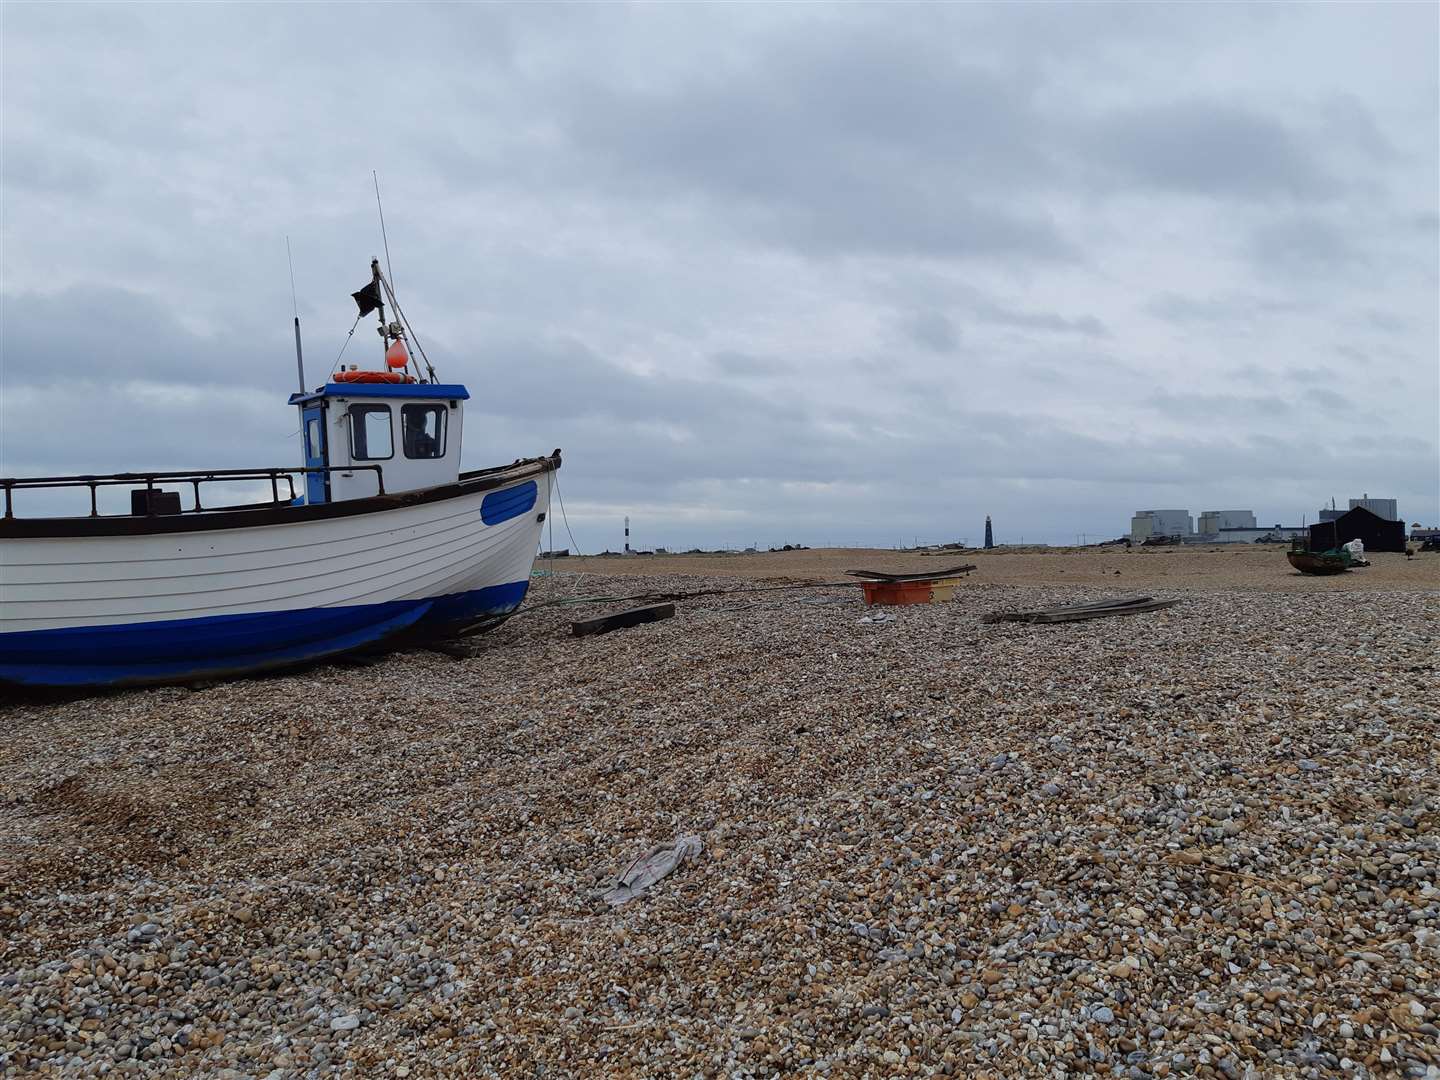 Boats on the beach at Dungeness